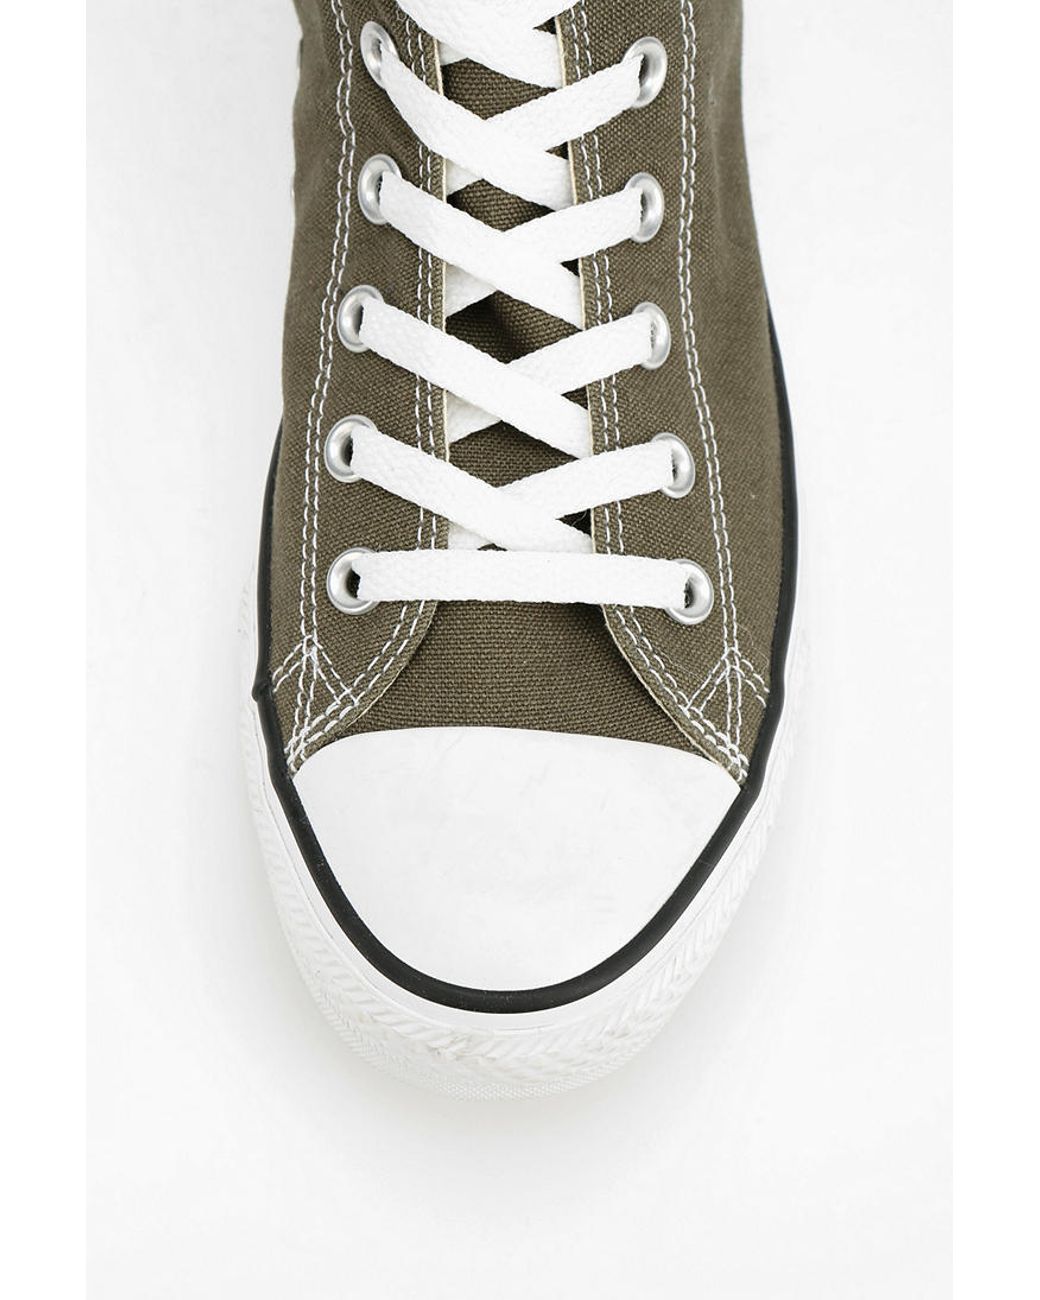 Converse Chuck Taylor All Star Womens Hightop Sneaker in Olive (Green) |  Lyst